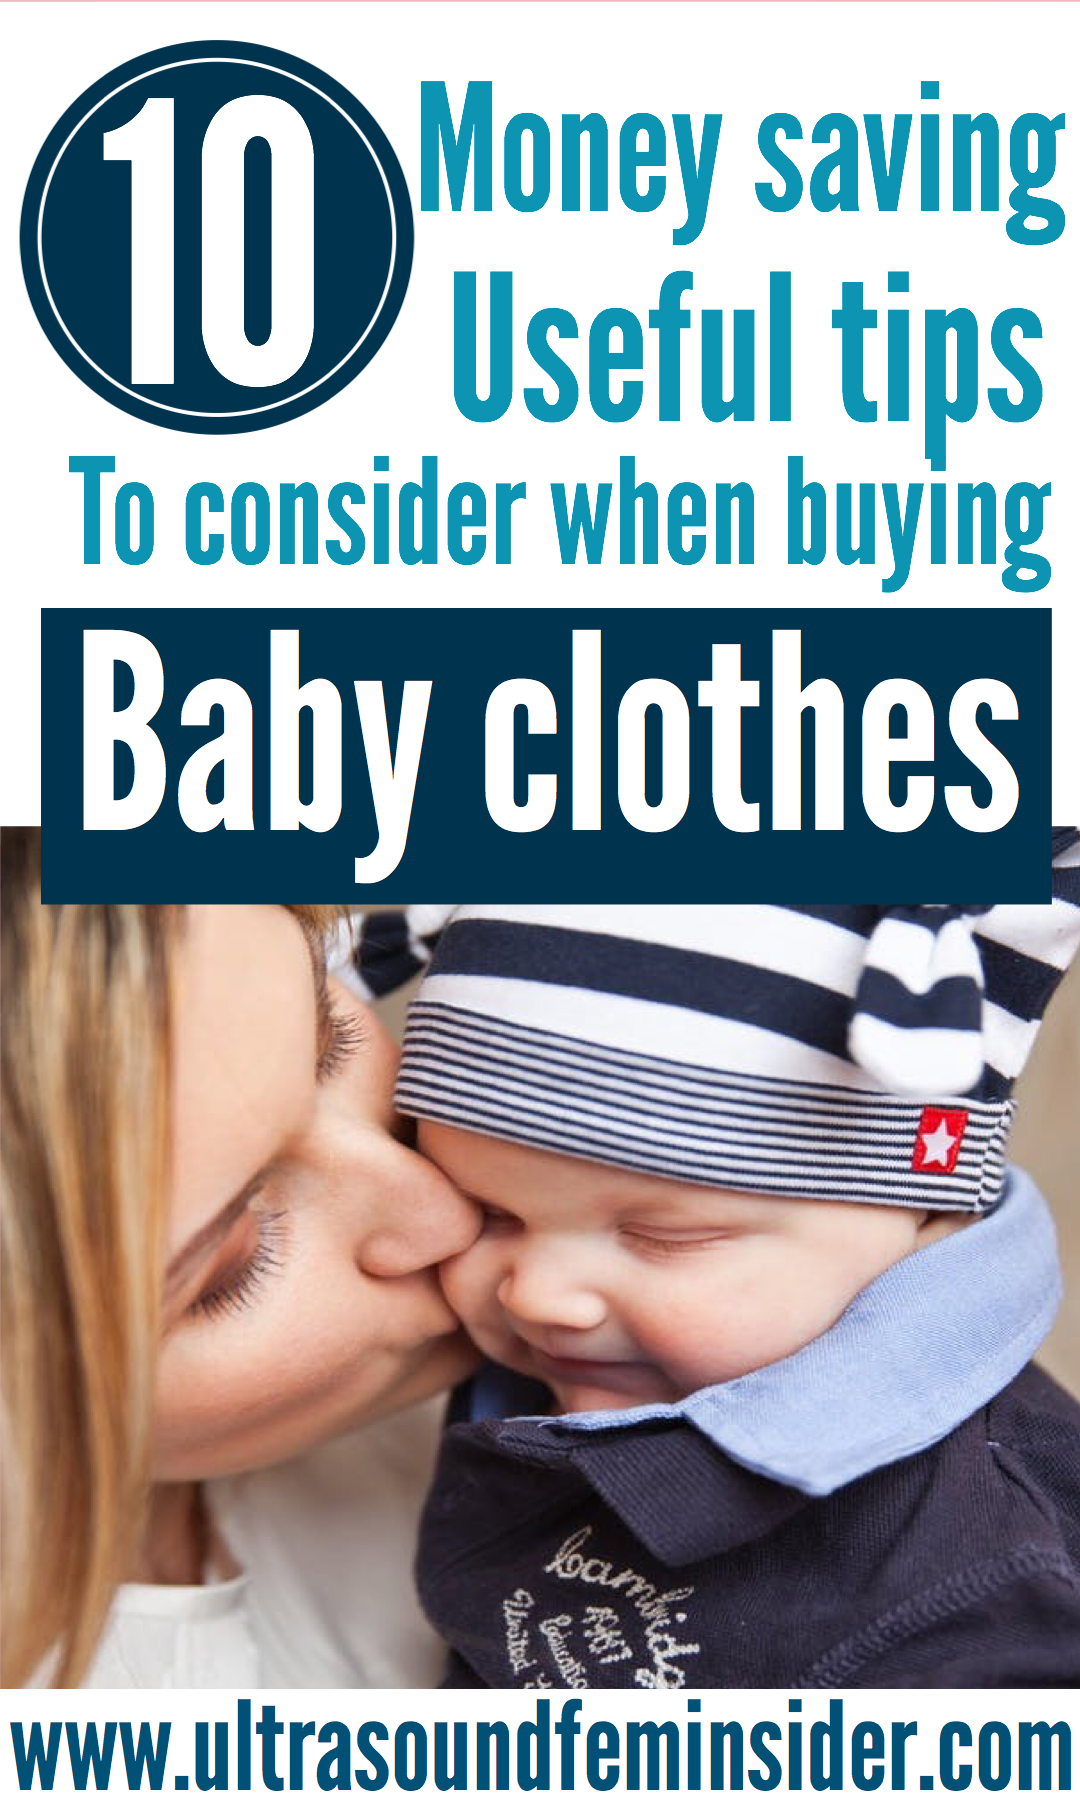 In this post I am going to give you some tips to save some money when buying baby clothes.